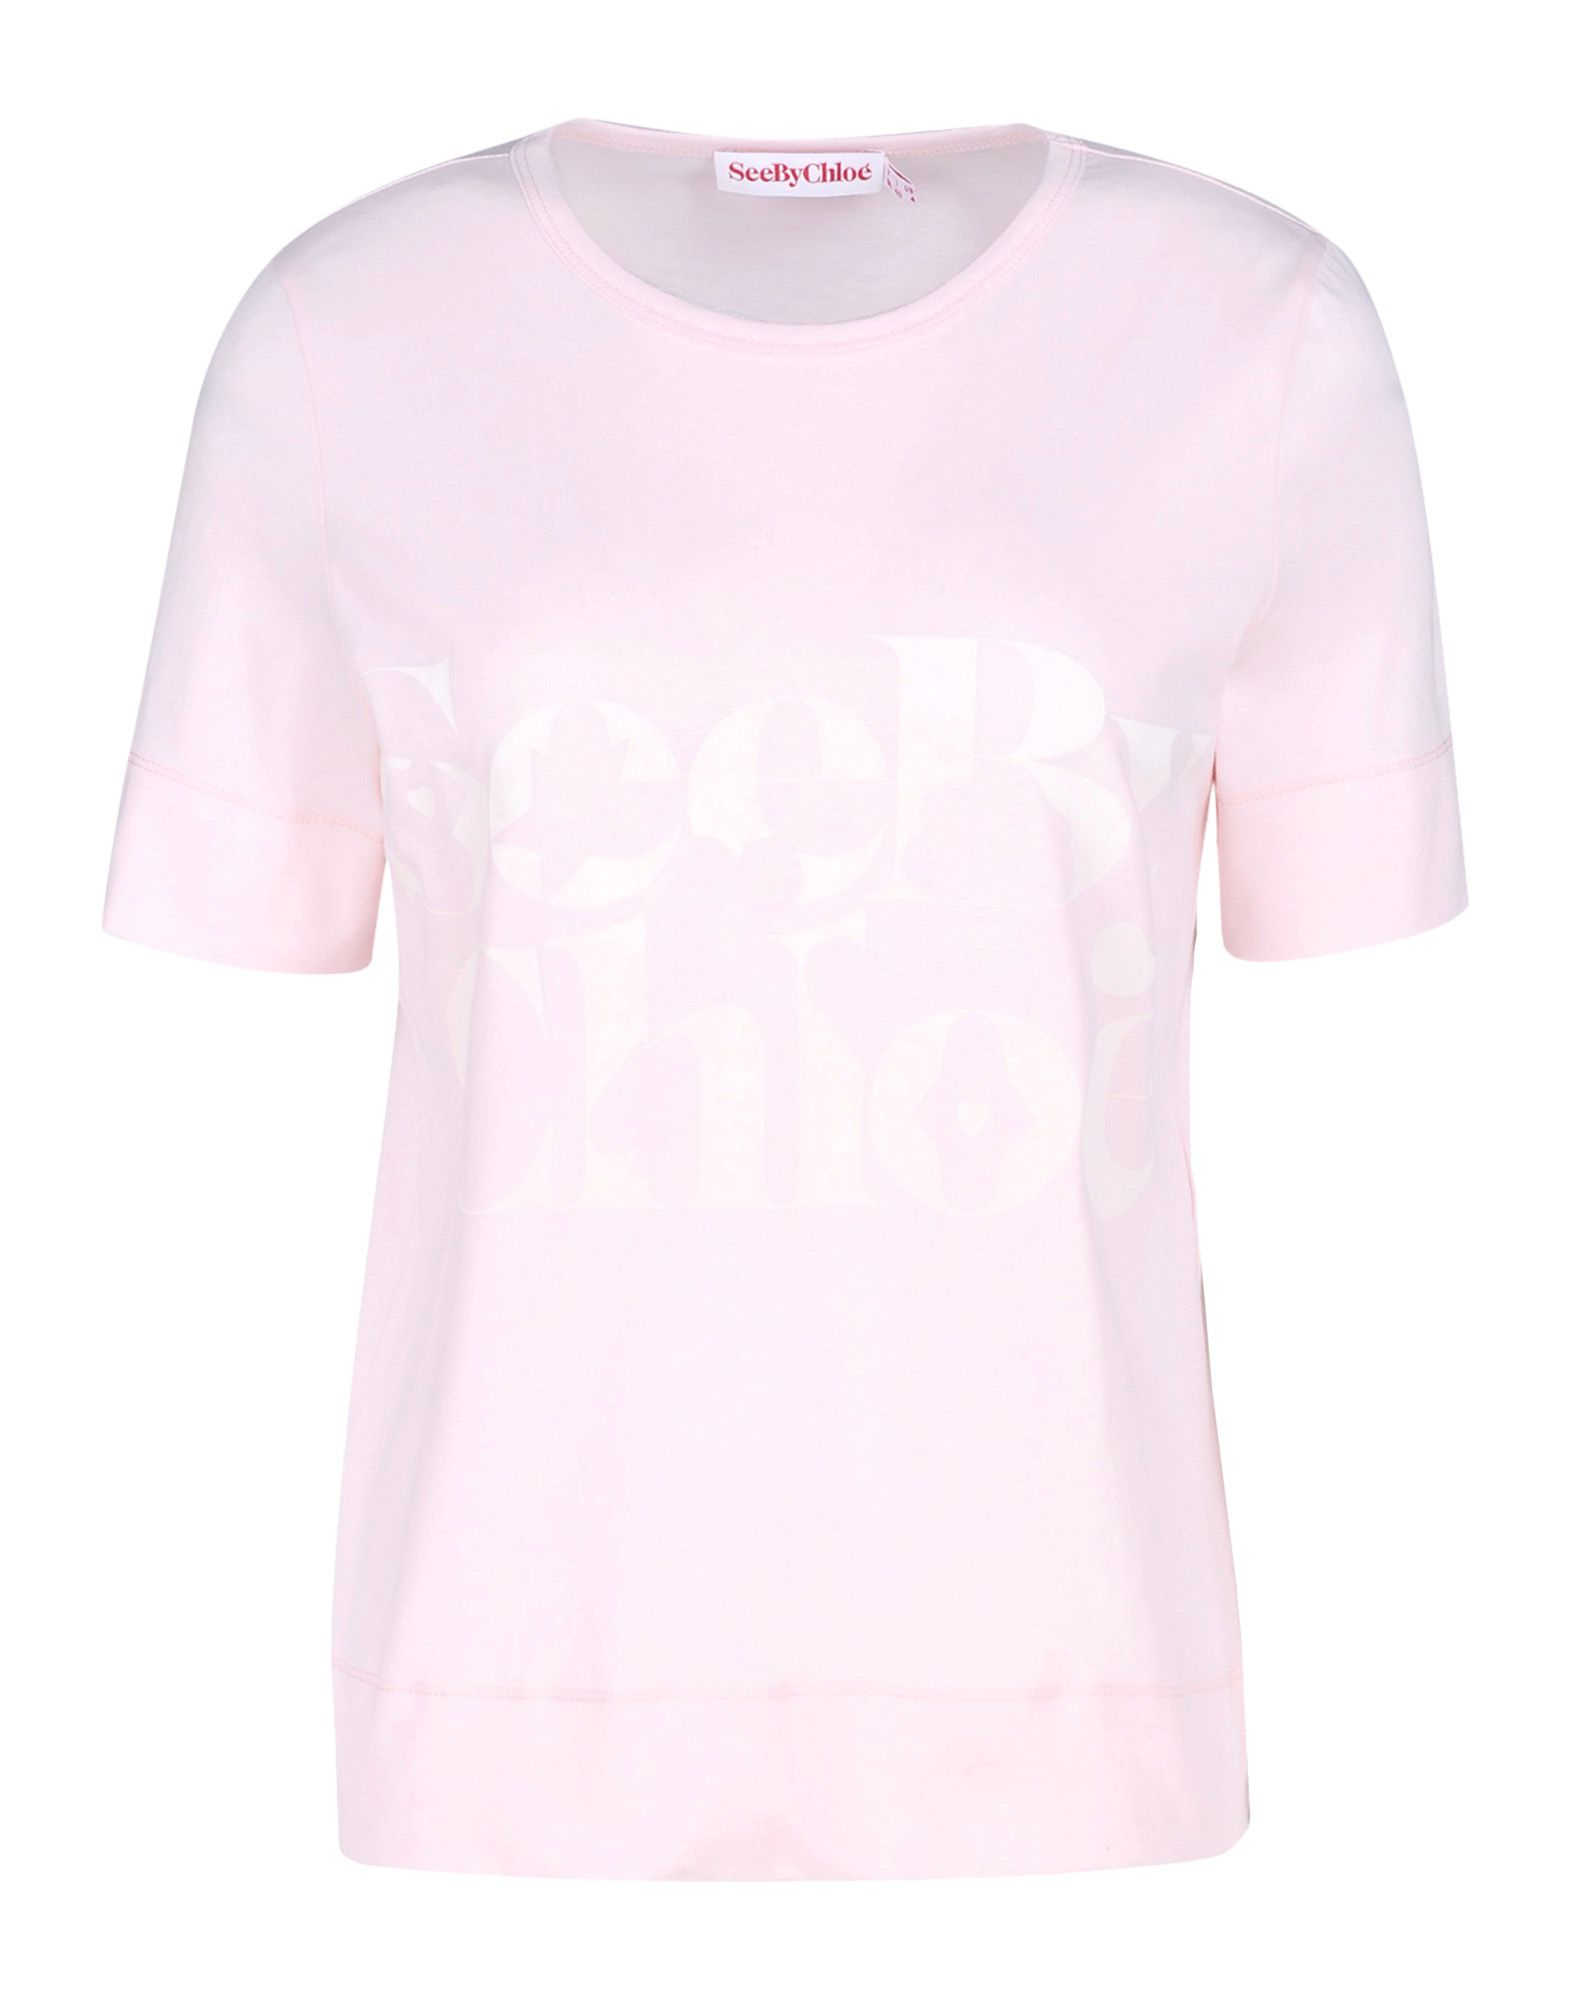 See By Chloé Short Sleeve T-Shirt in Pink | Lyst